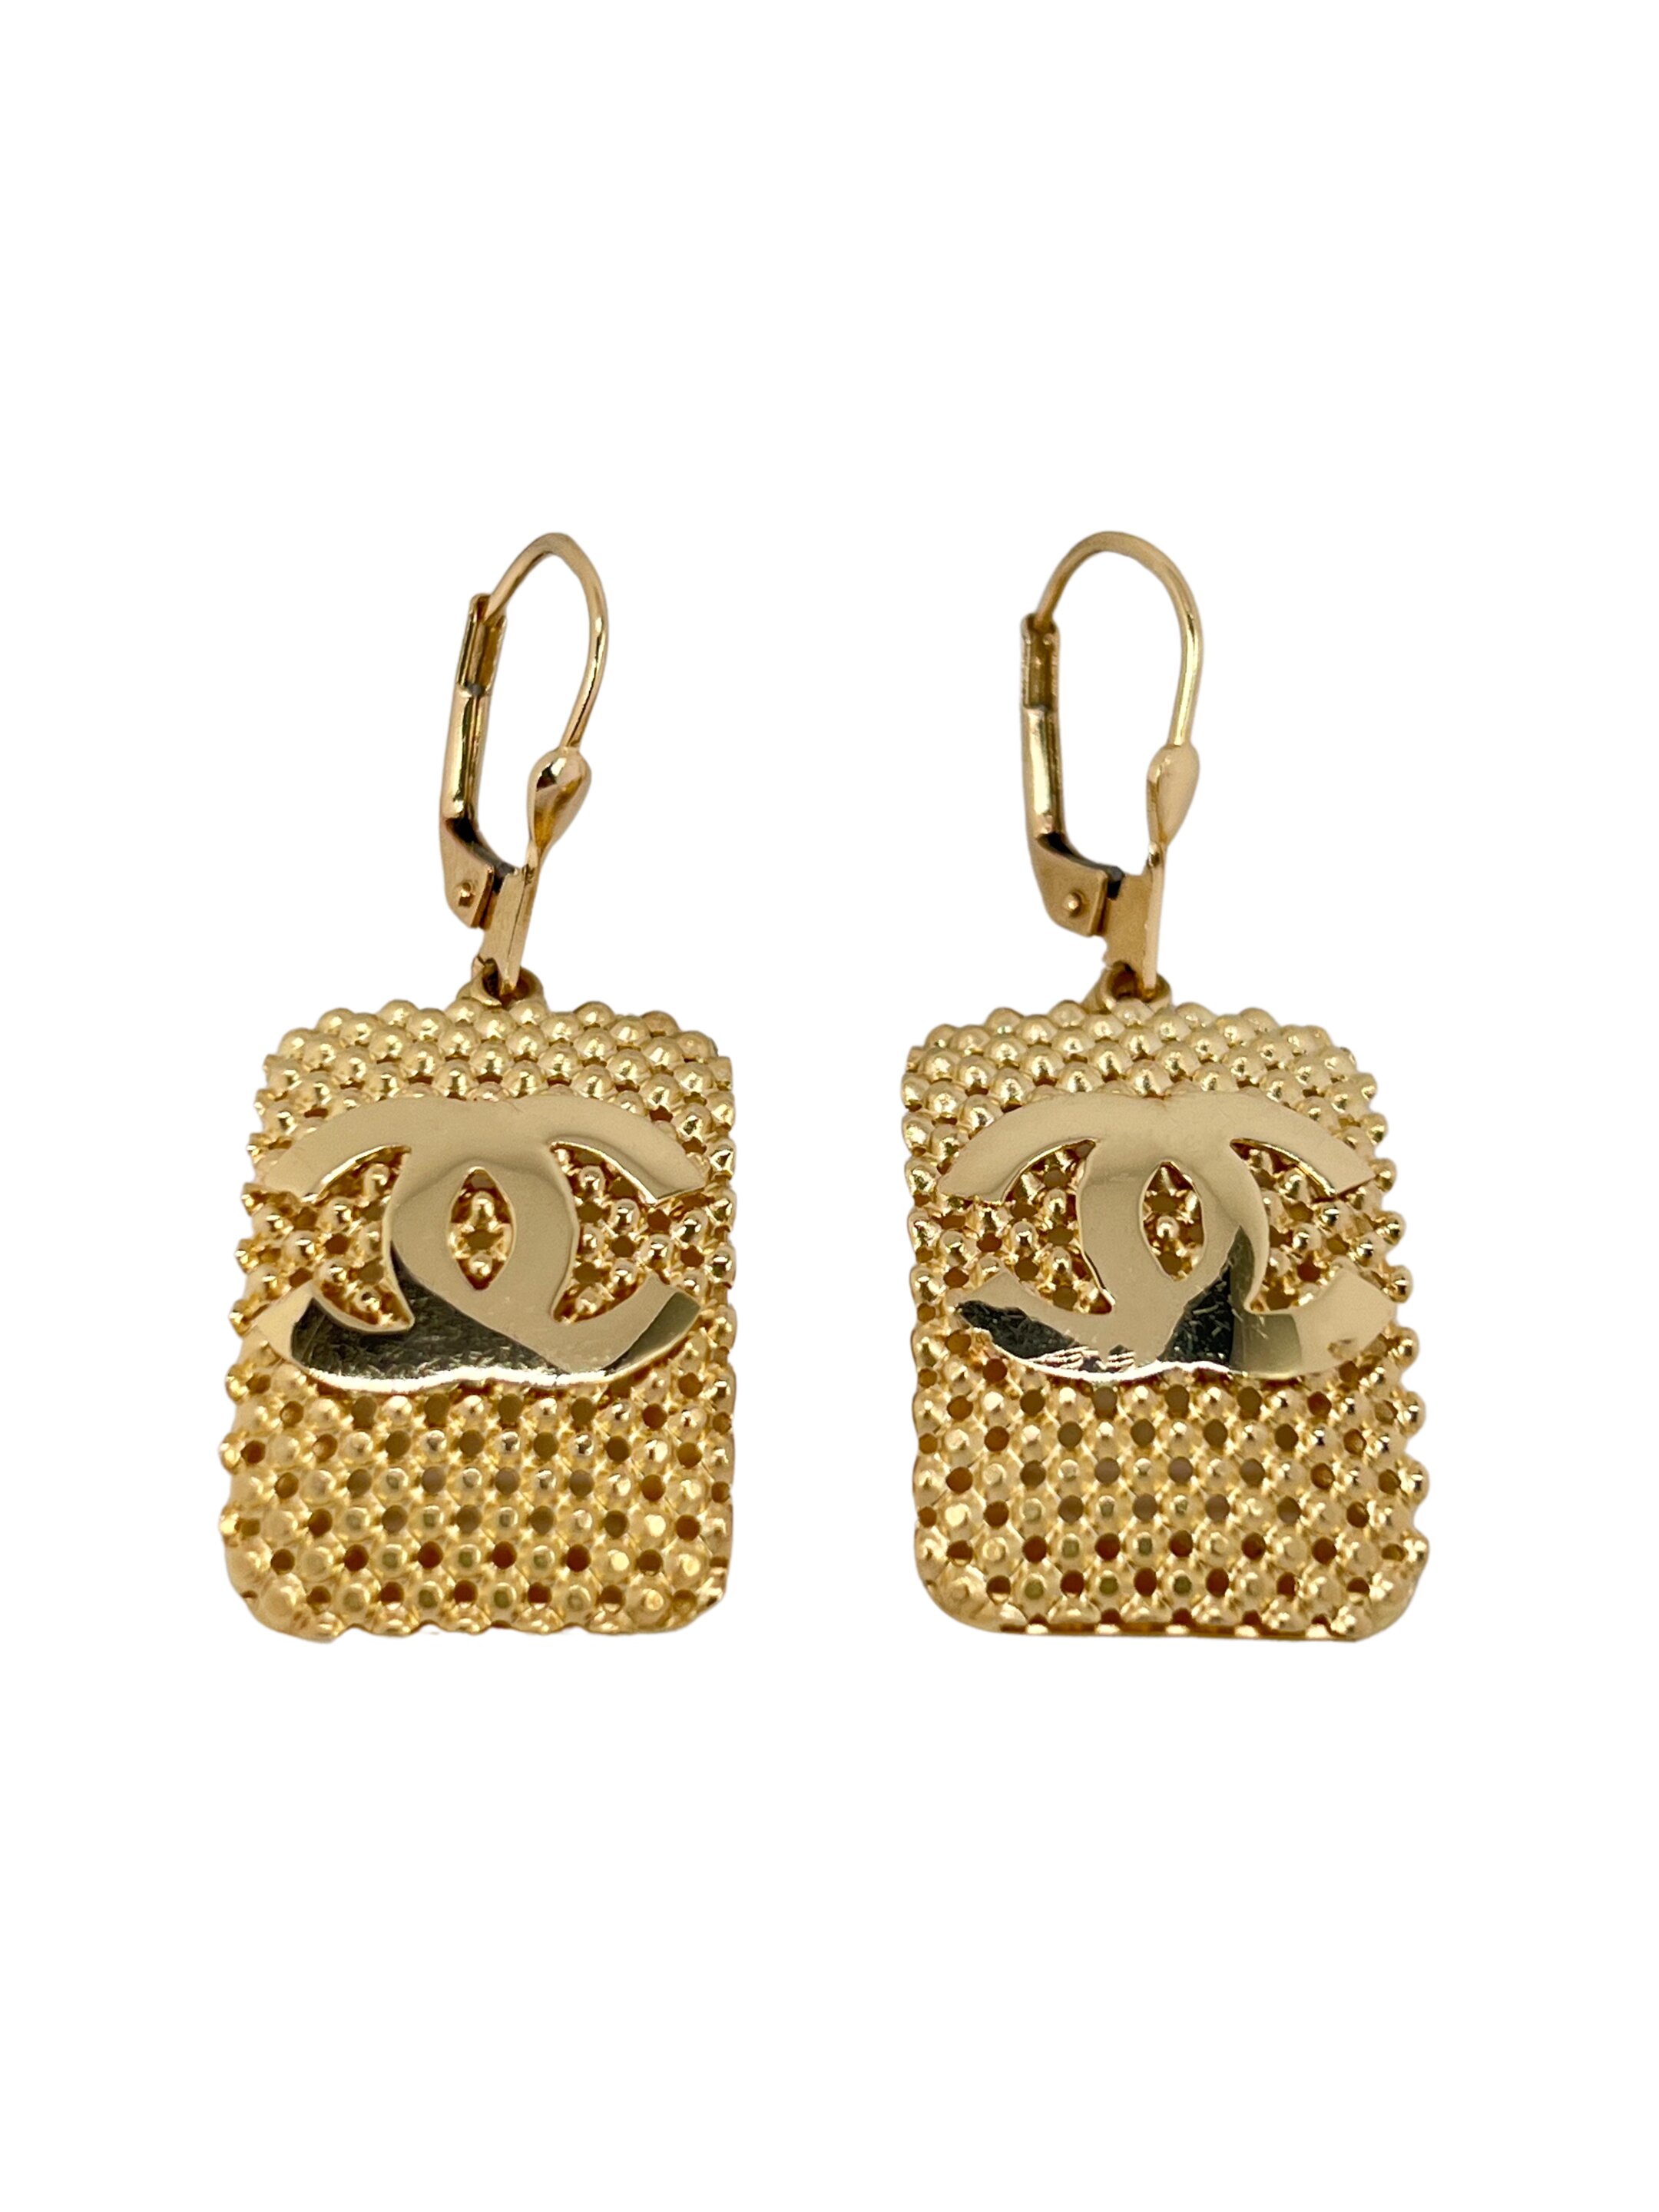 Gold earrings with the letters CC